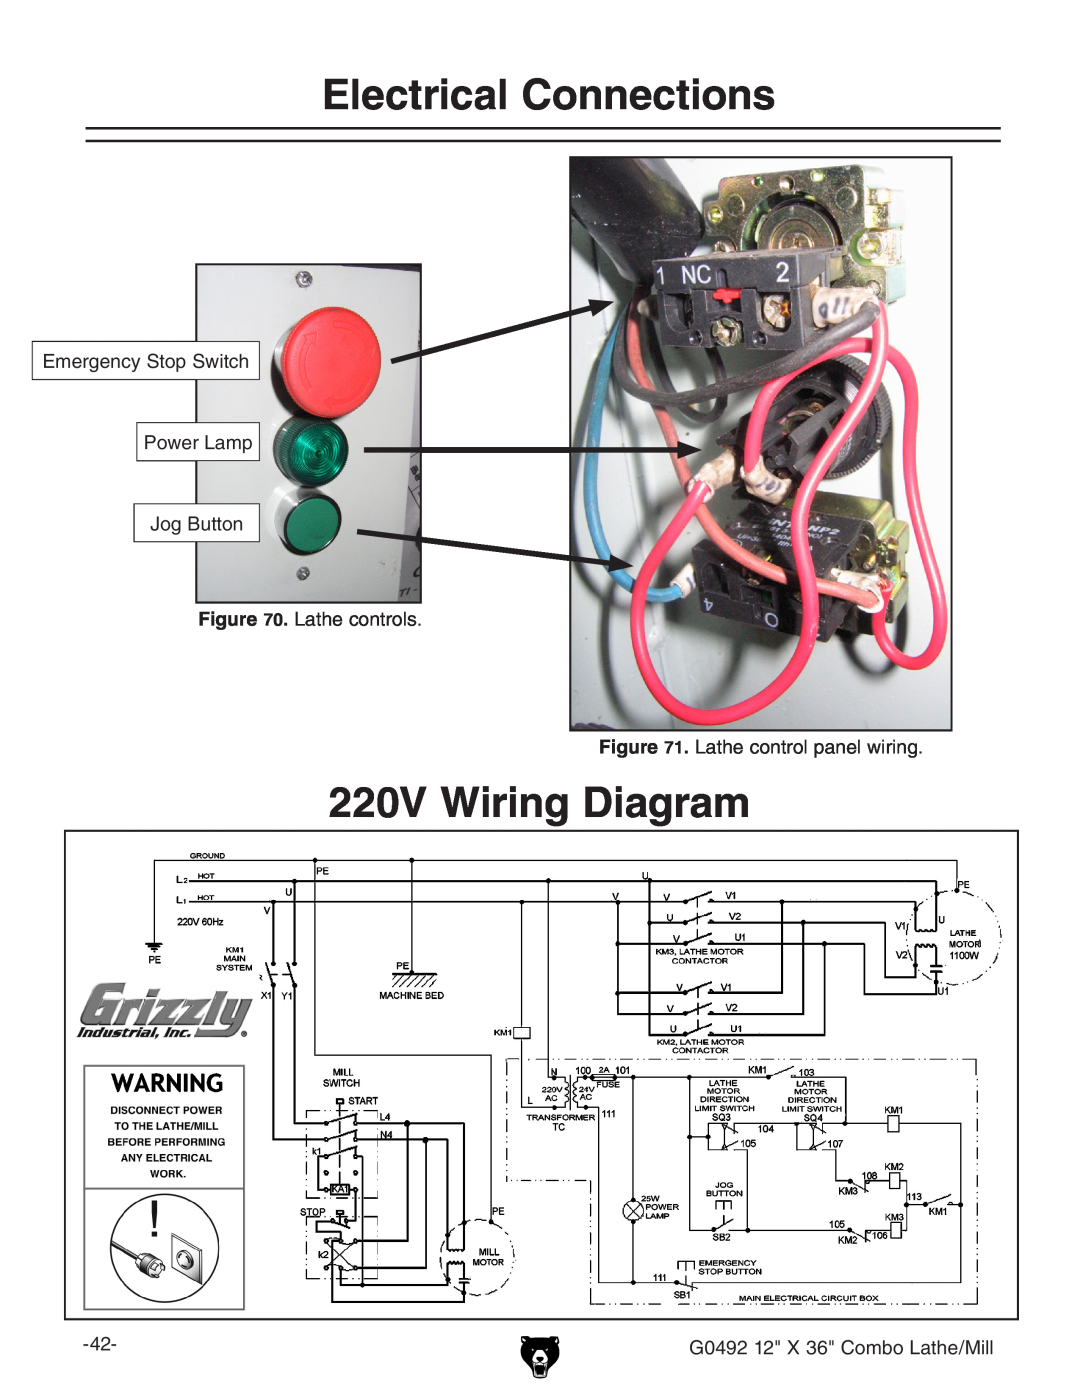 Grizzly G0492 220V Wiring Diagram, Electrical Connections, Emergency Stop Switch Power Lamp Jog Button . Lathe controls 